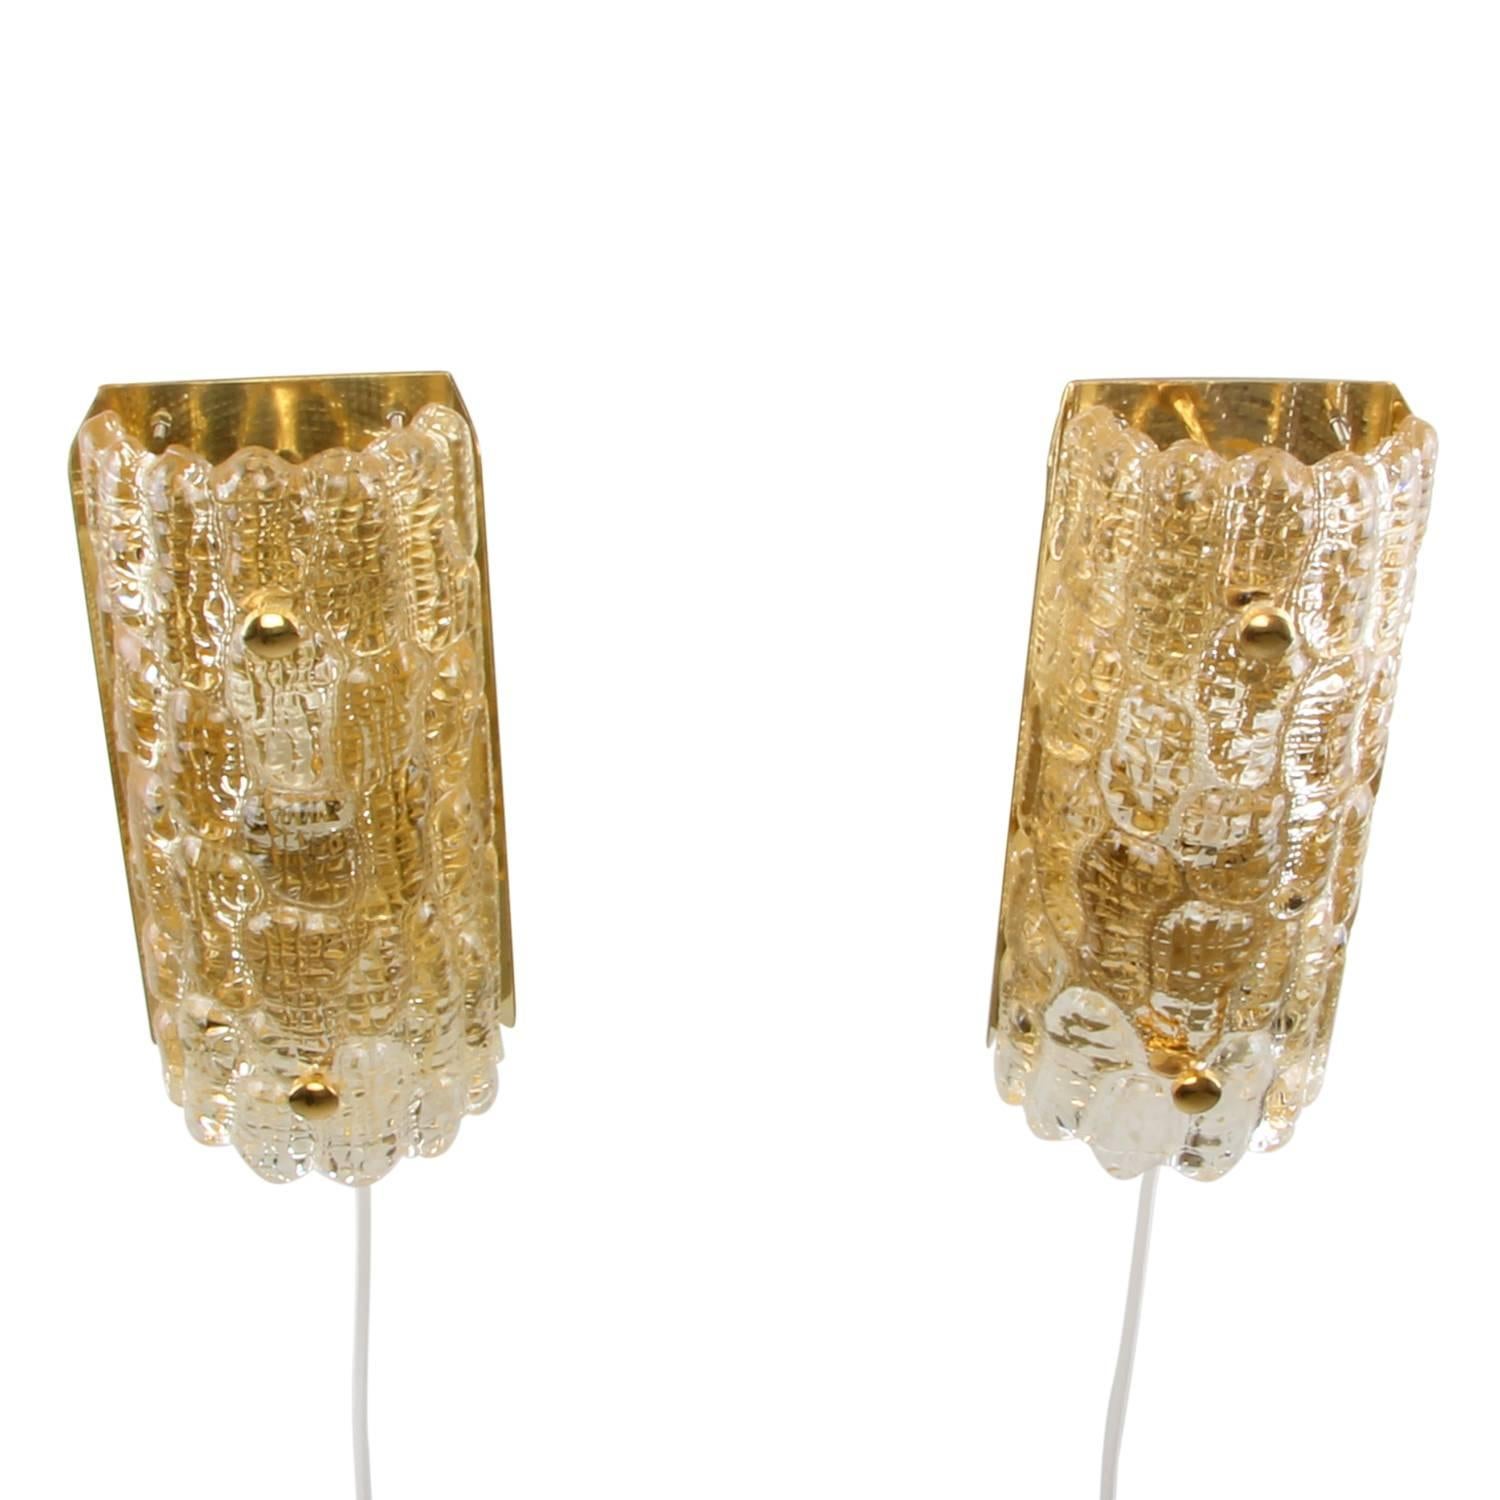 Brass Gefion Sconces 'Pair', Crystal Glass Wall Lights by Lyfa/Orrefors, 1960s For Sale